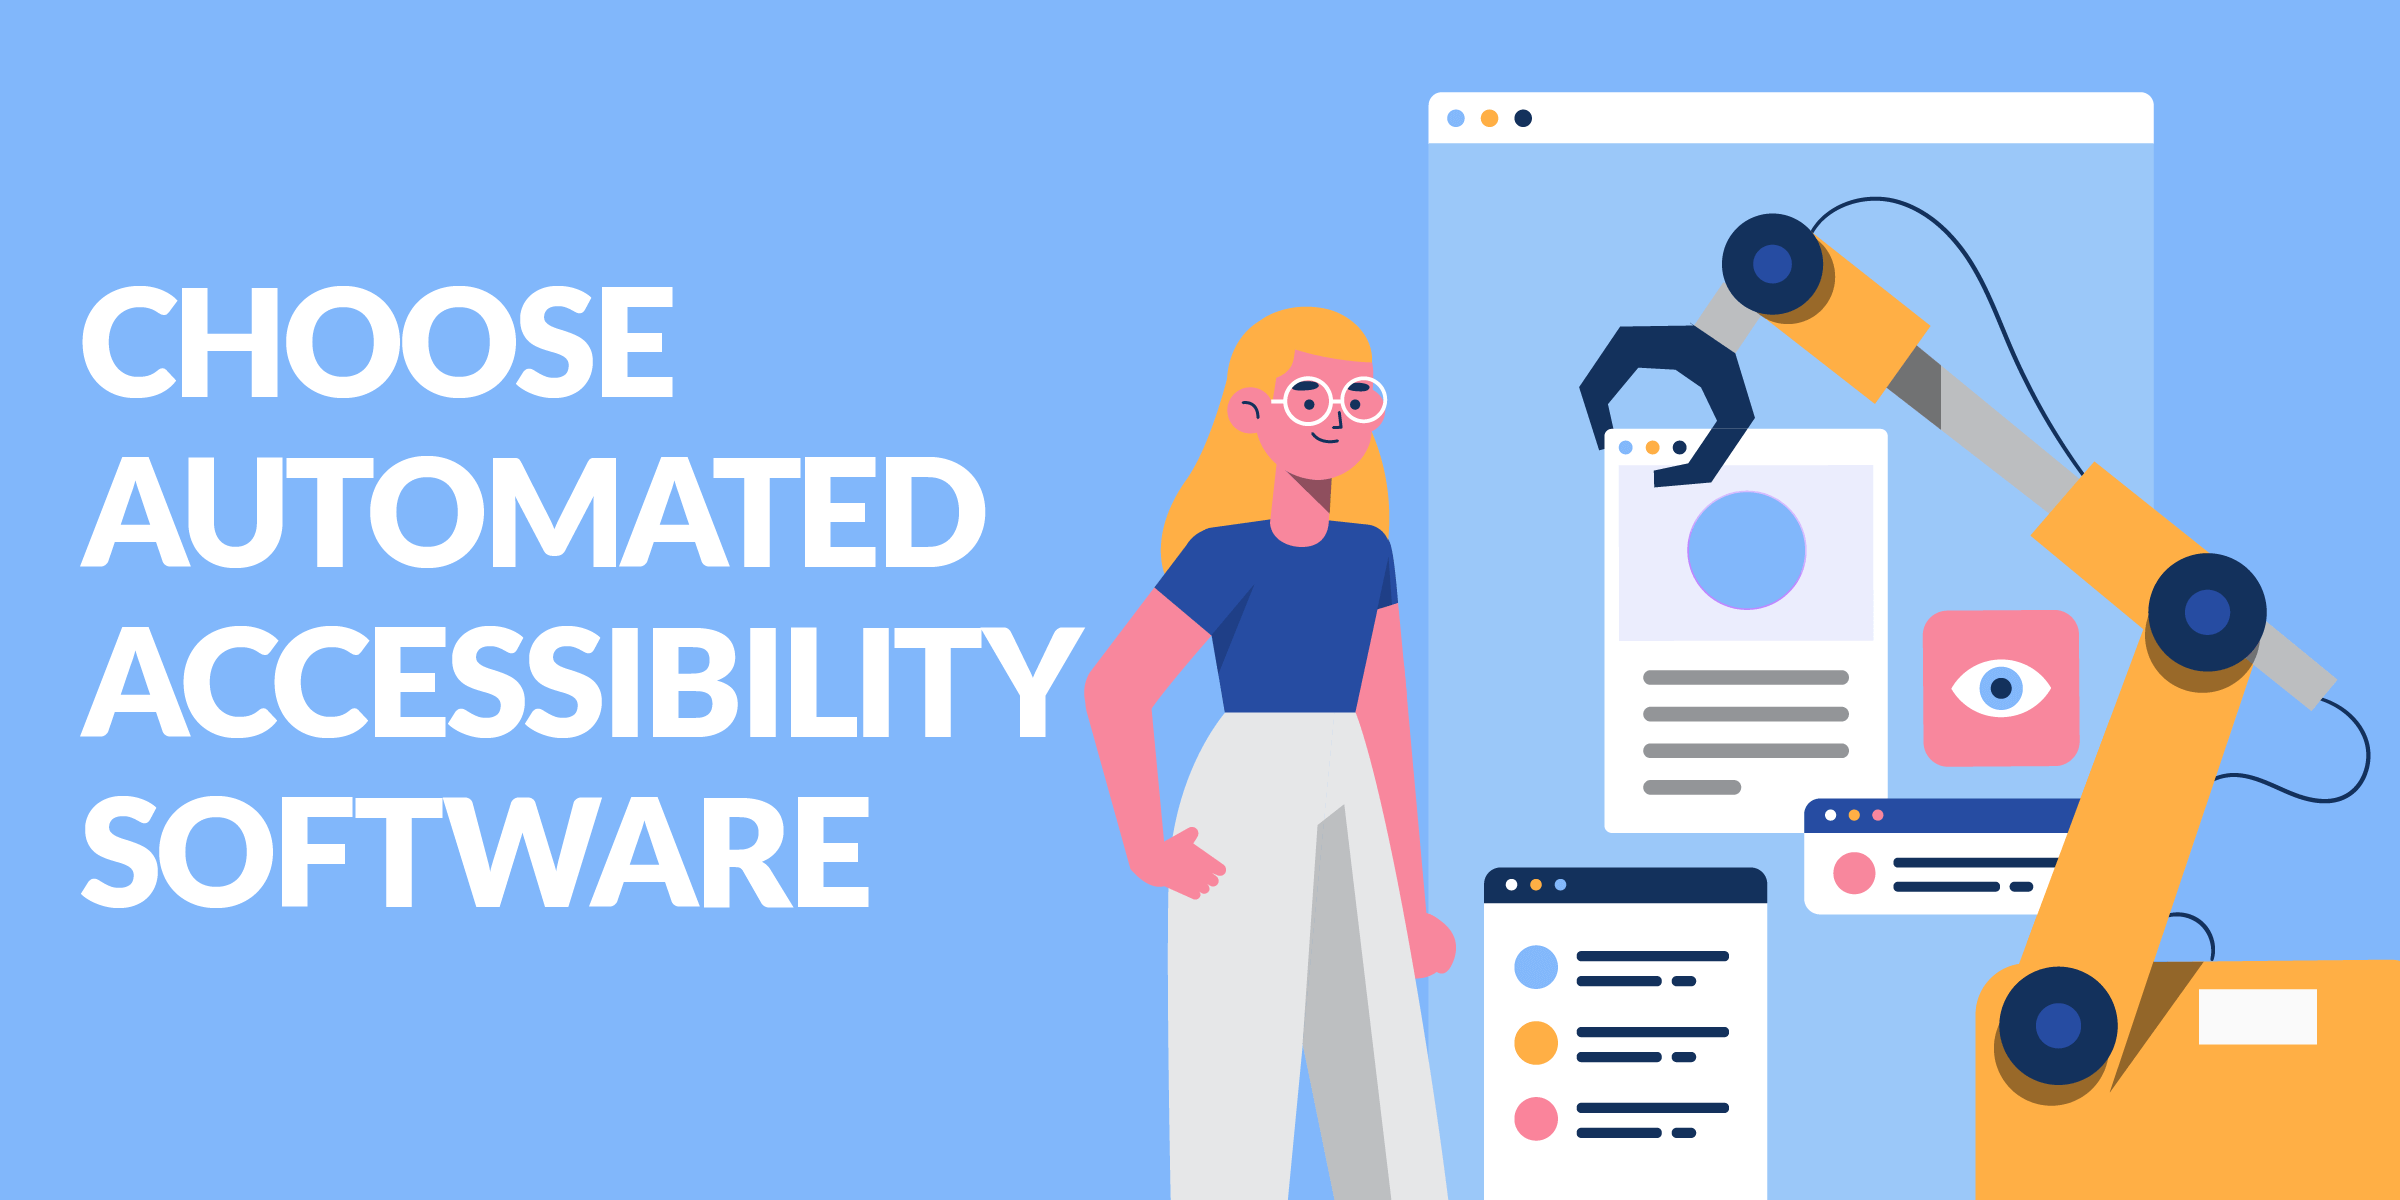 Choose Automated Accessibility Software